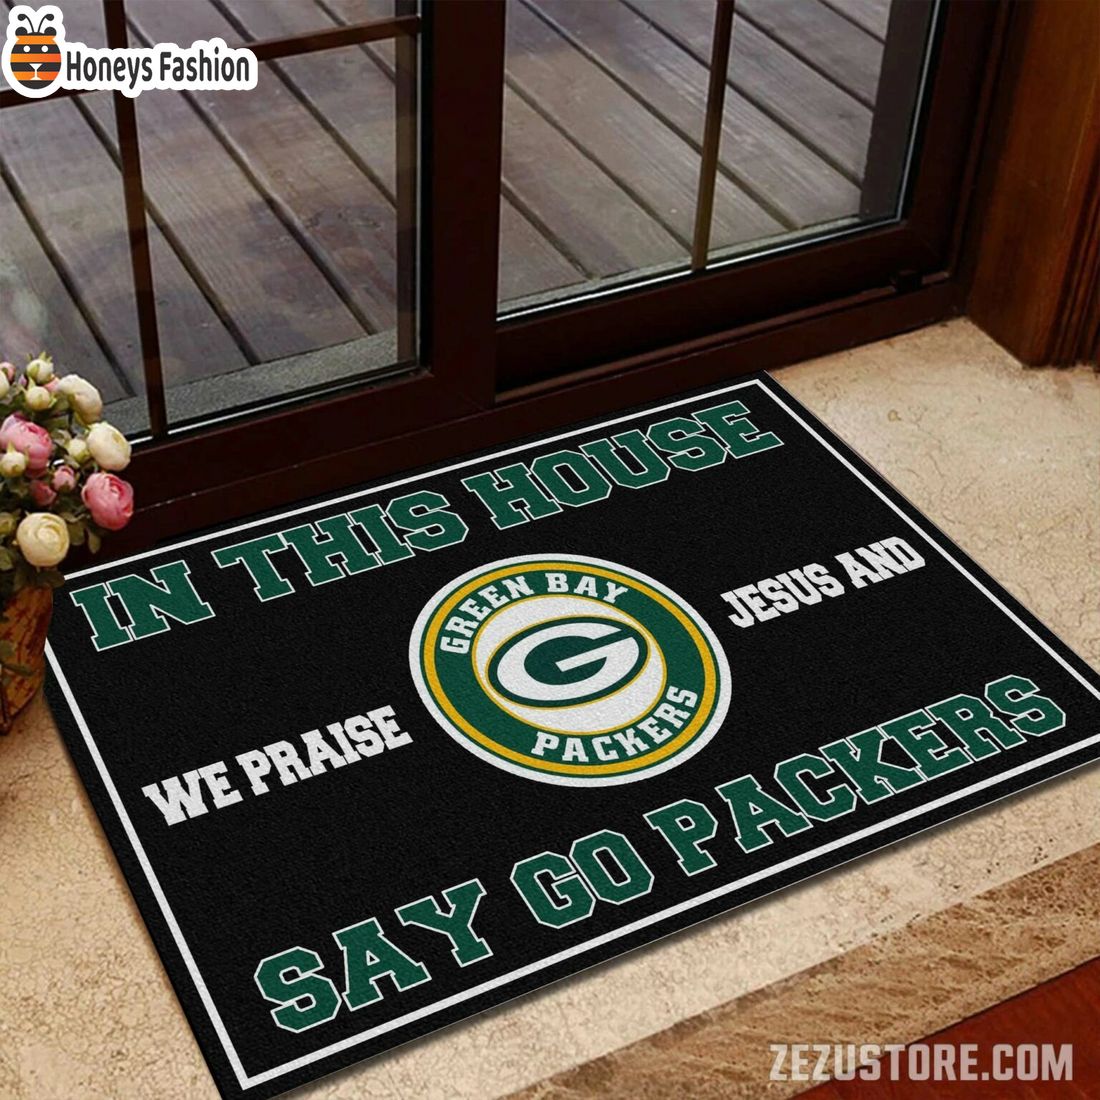 In this house we praise jesus and say go Packers doormat